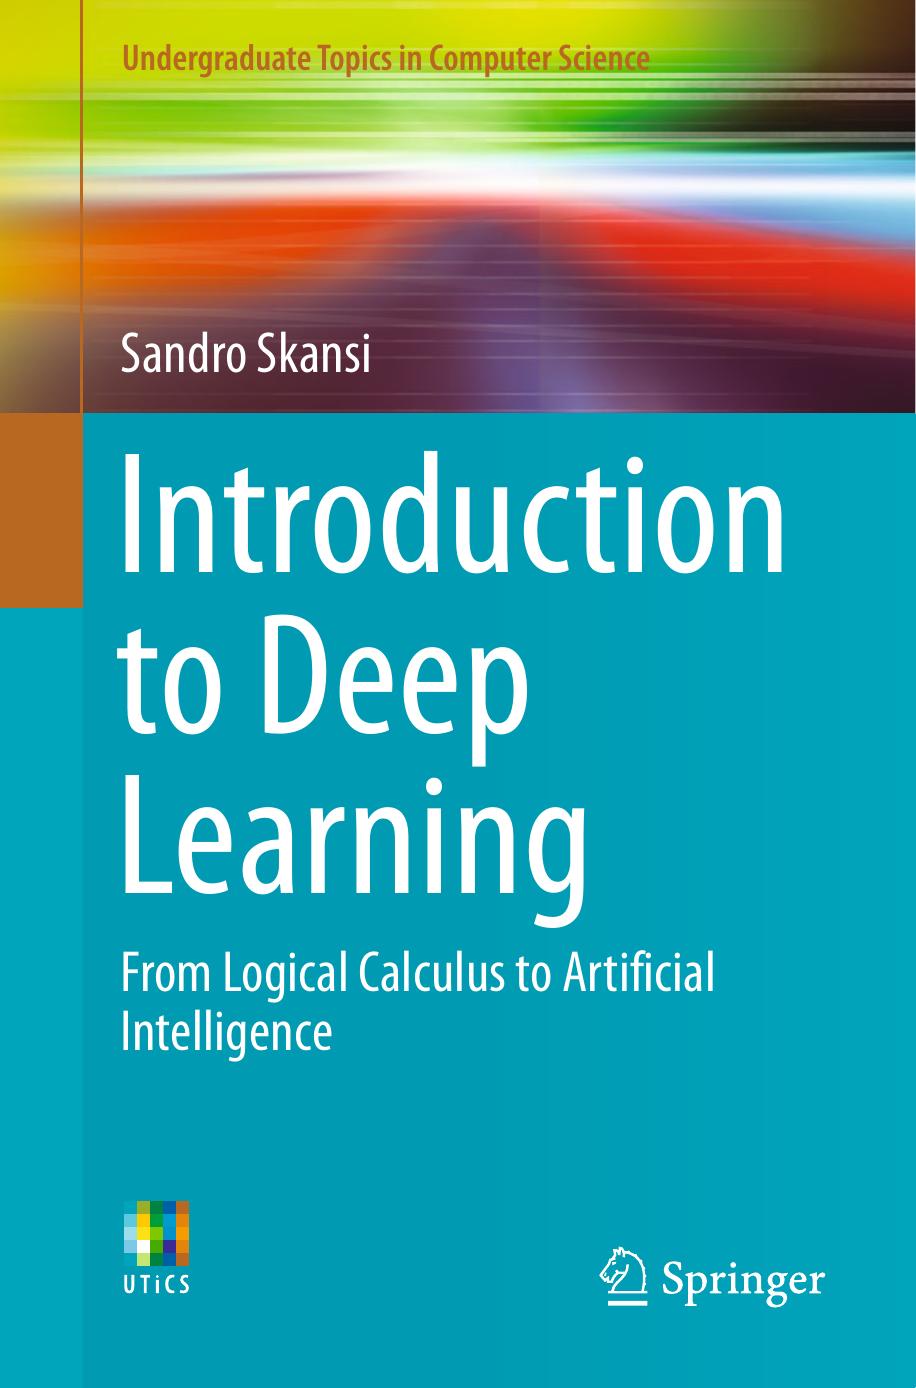 Introduction to Deep Learning by Sandro Skansi